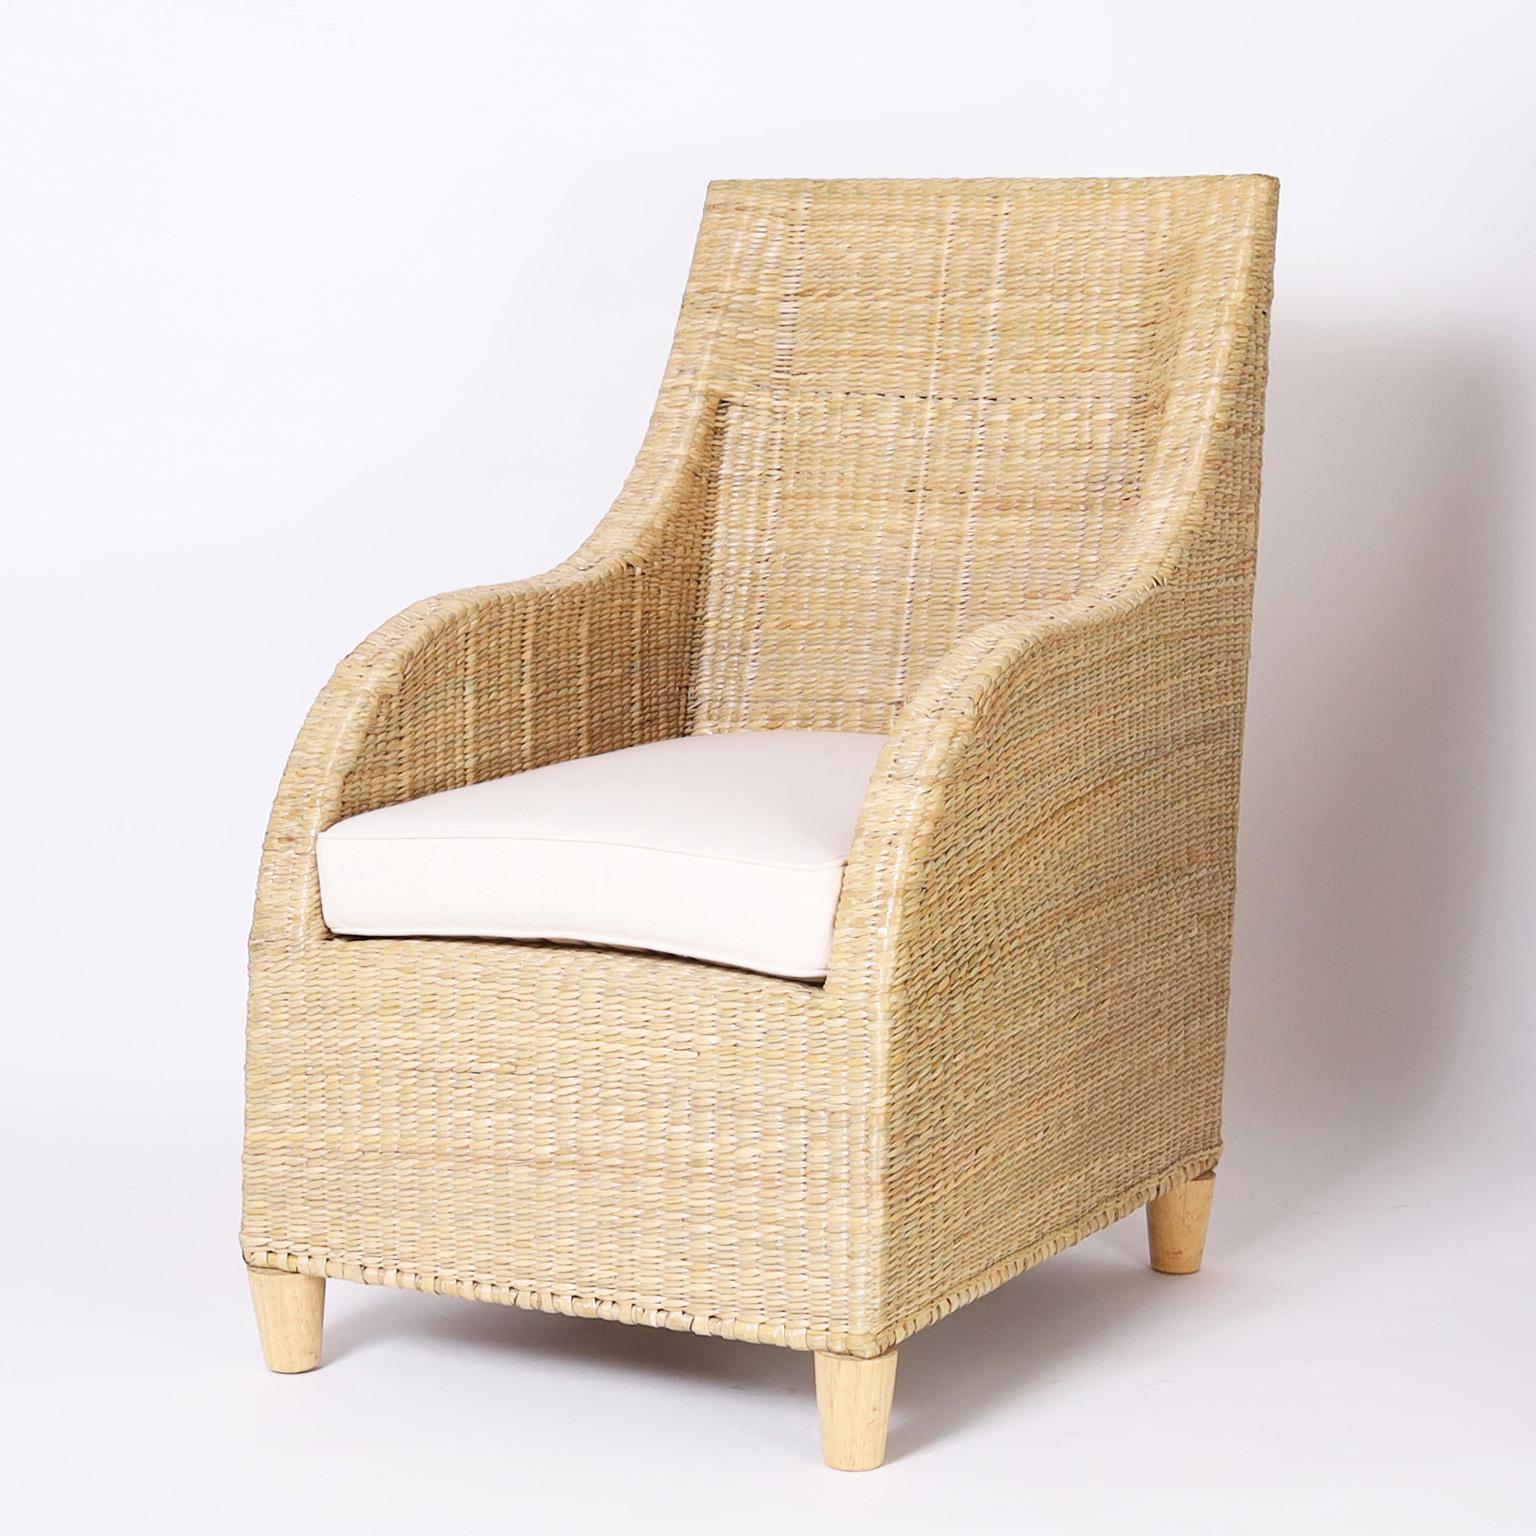 British Colonial Wicker Armchairs from the FS Flores Collection, Priced Individually For Sale